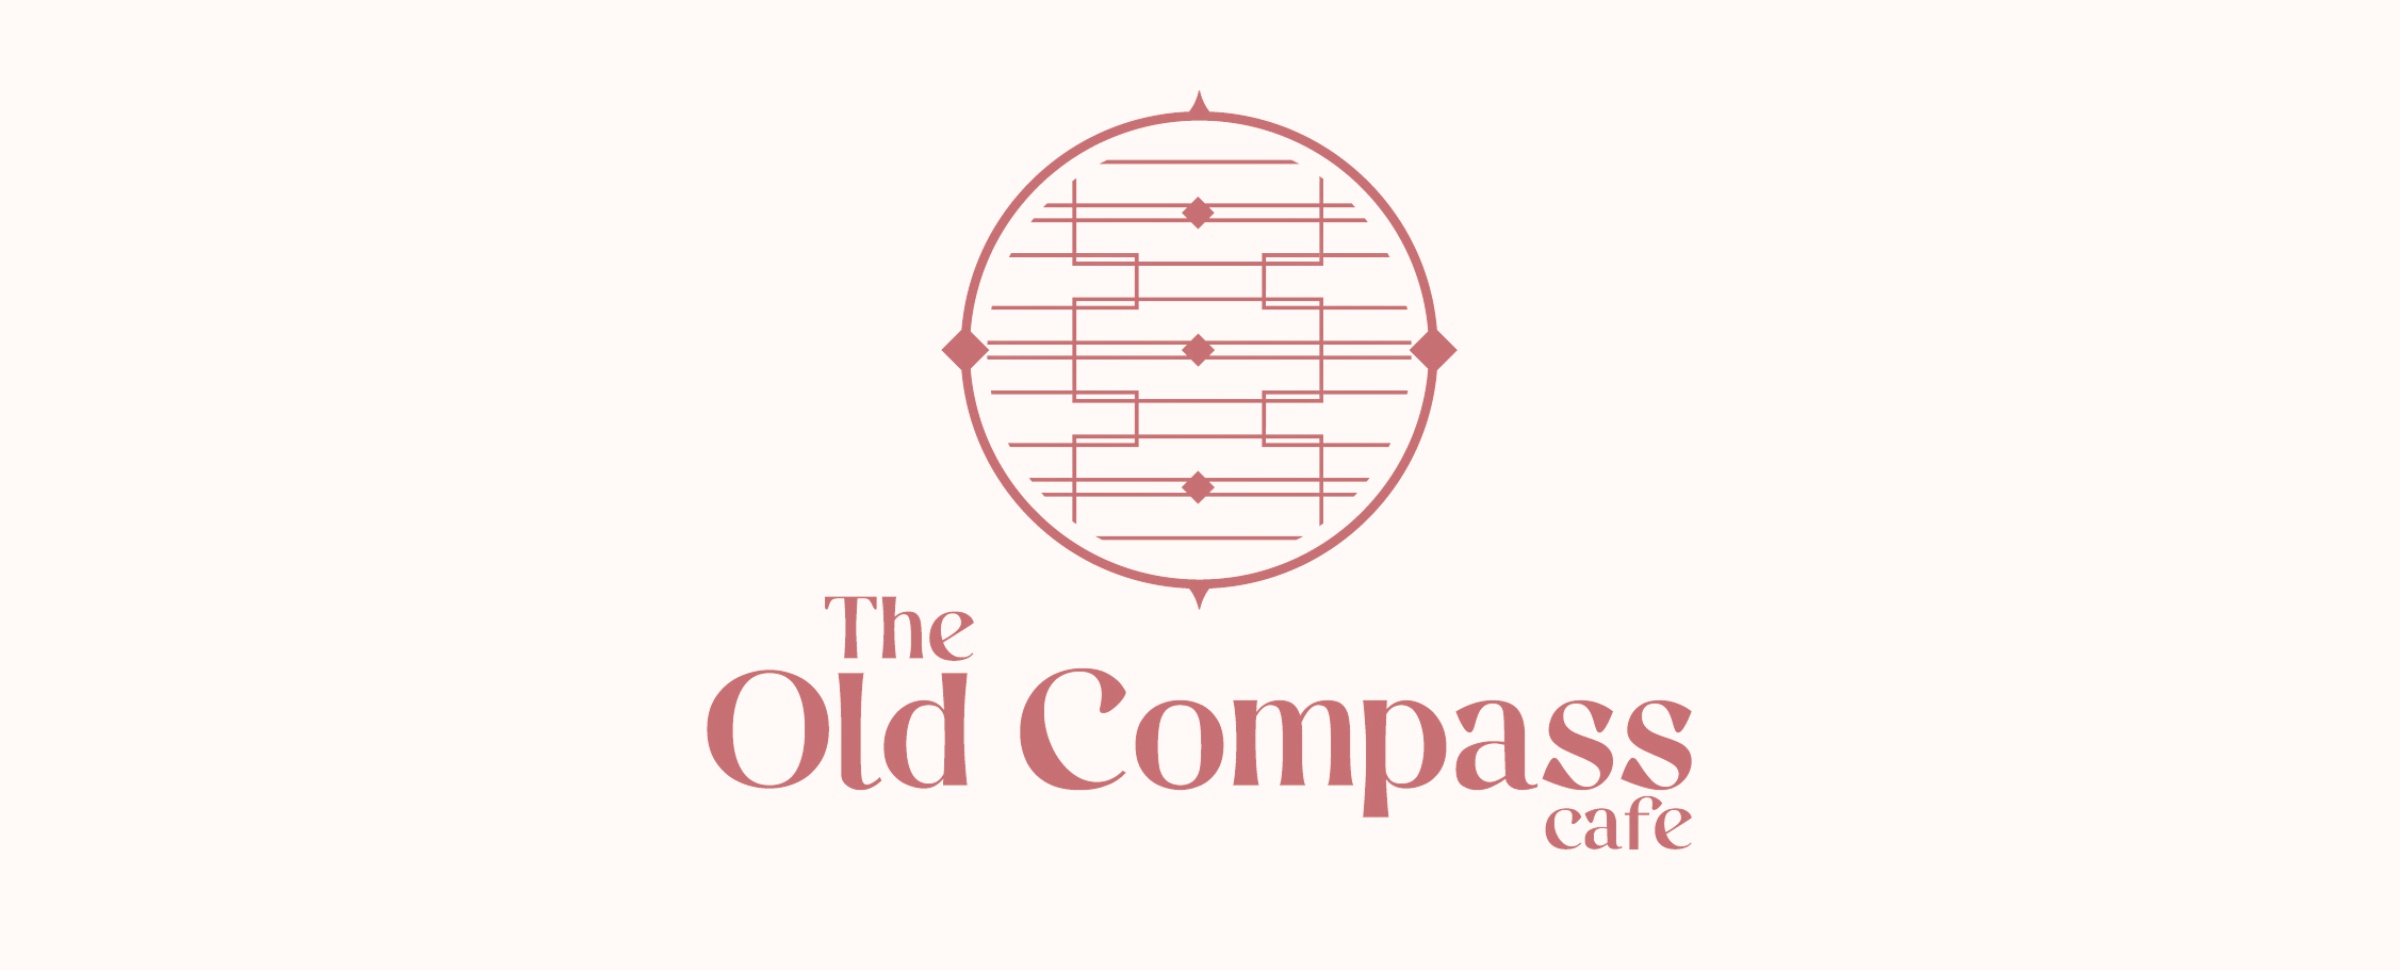 The Old Compass Cafe light